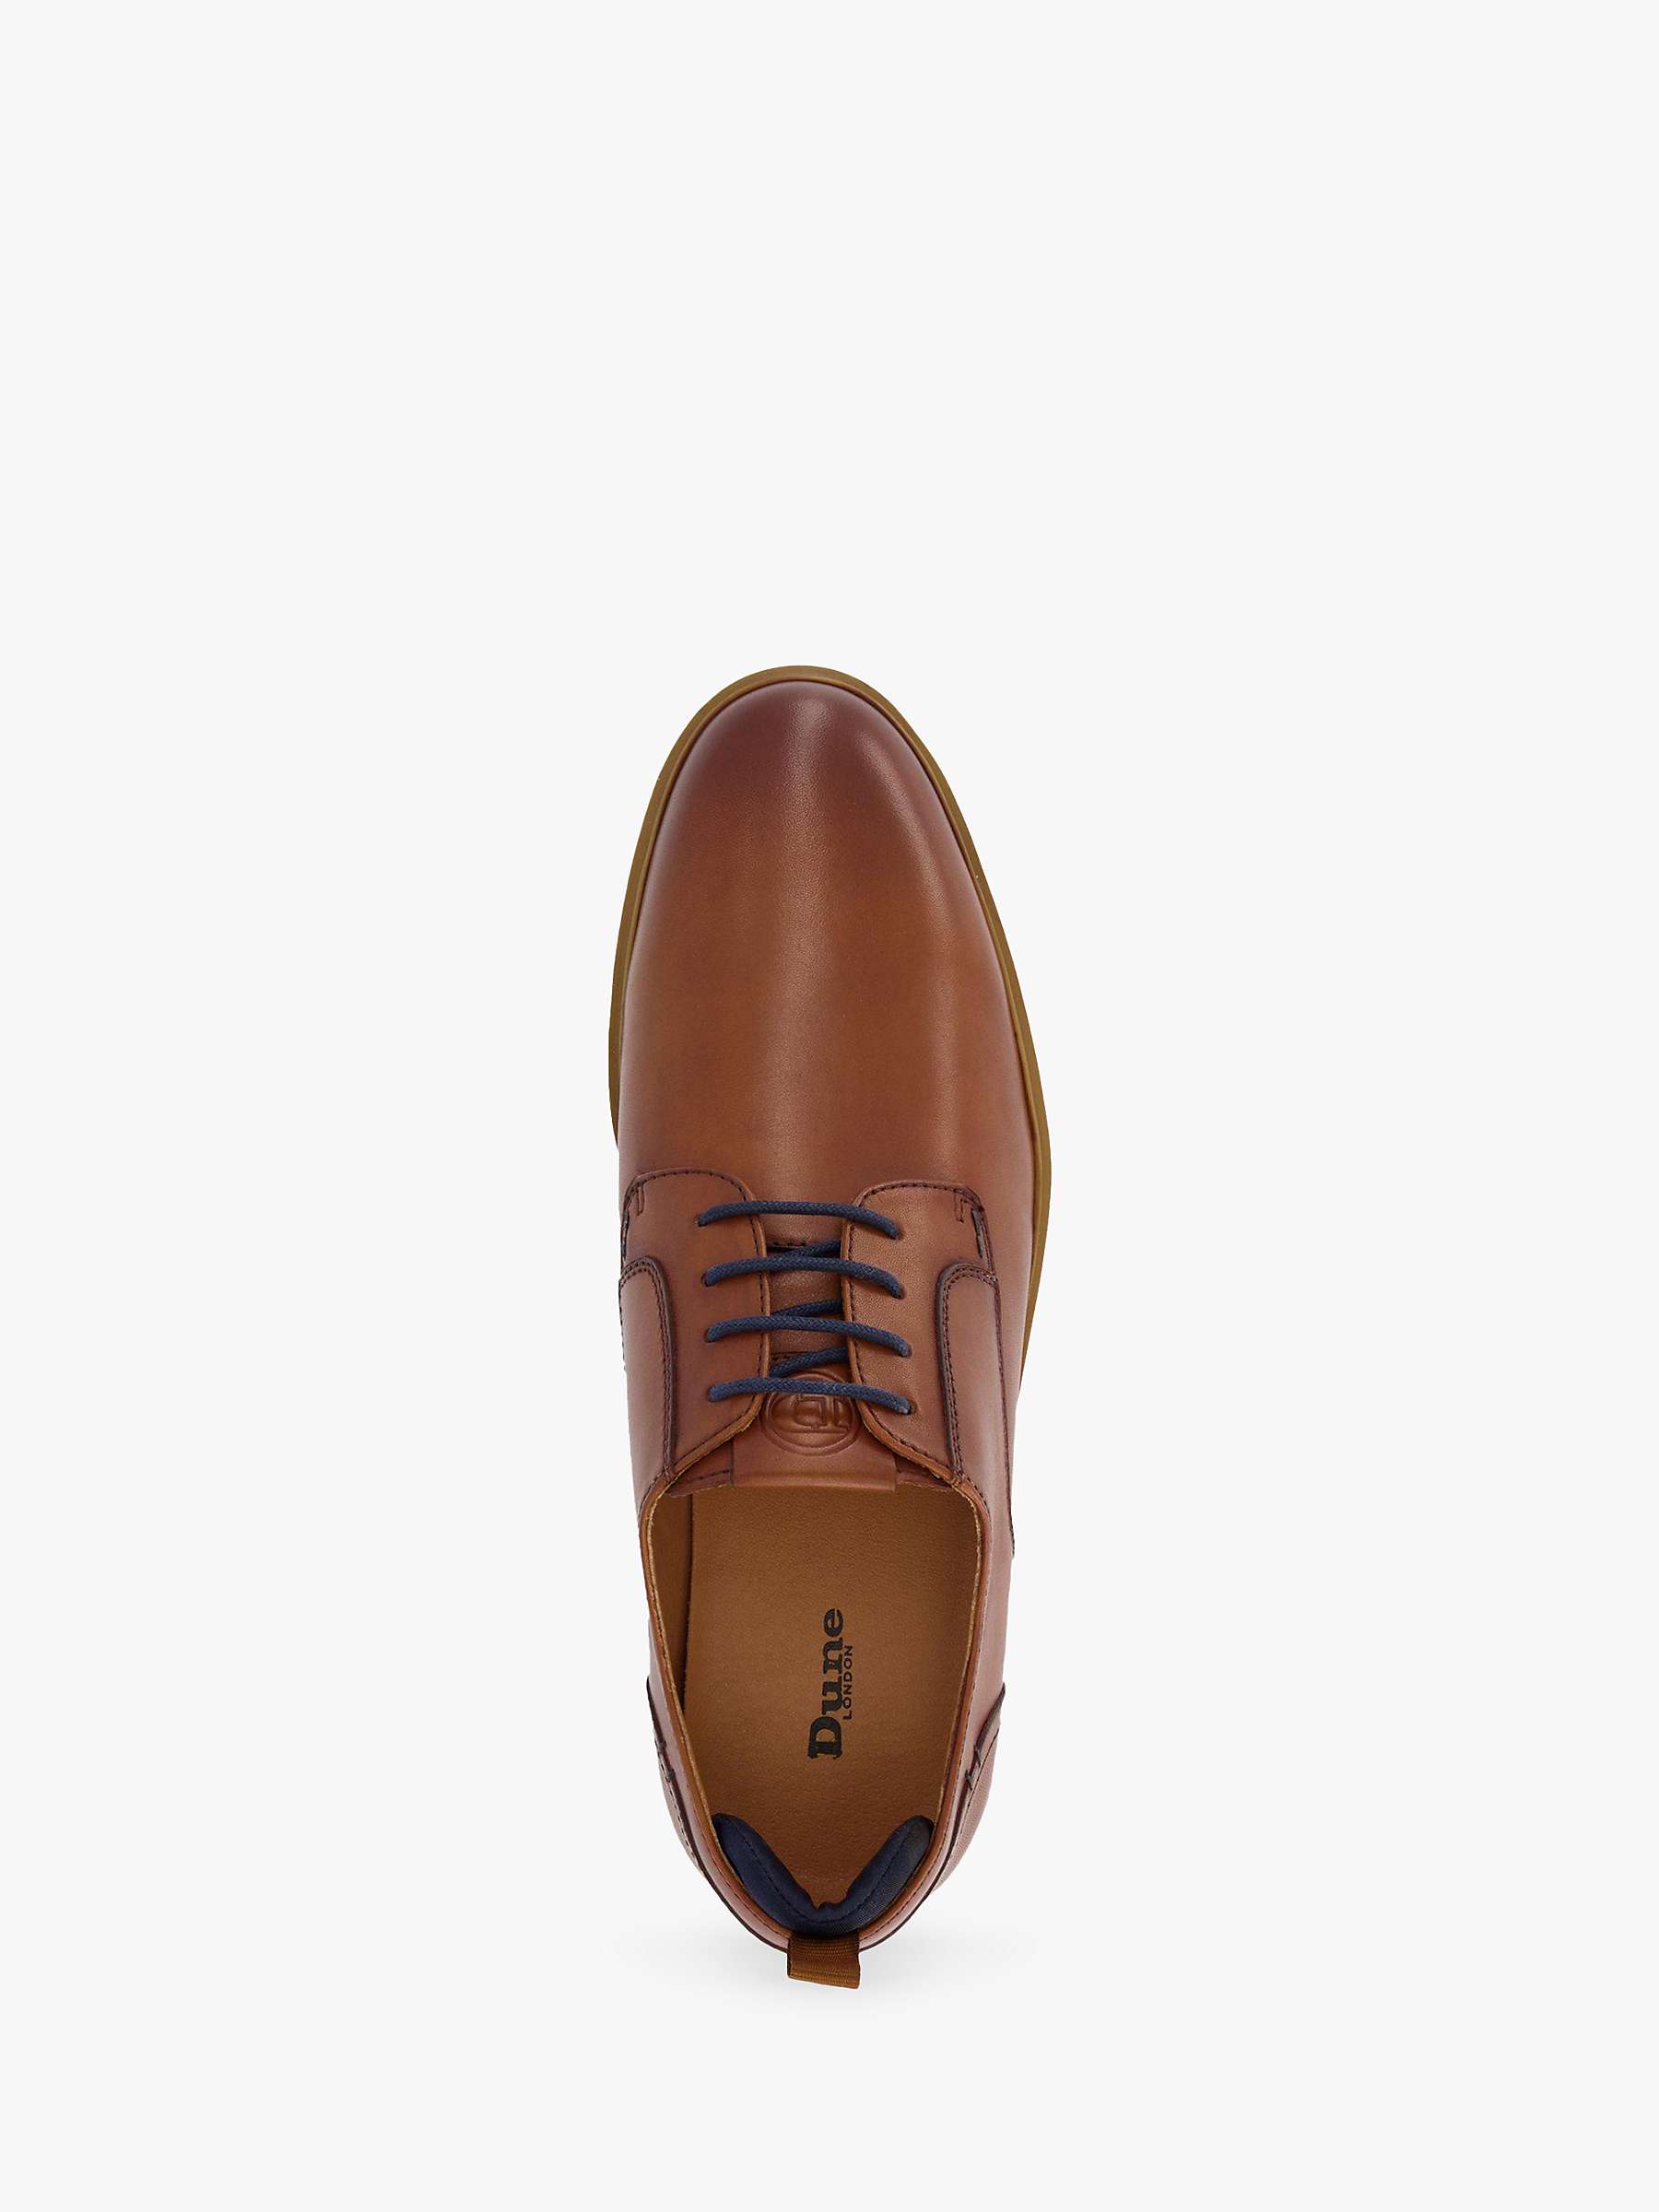 Buy Dune Bucatini Leather Wedge Sole Lace Up Shoes, Tan Online at johnlewis.com